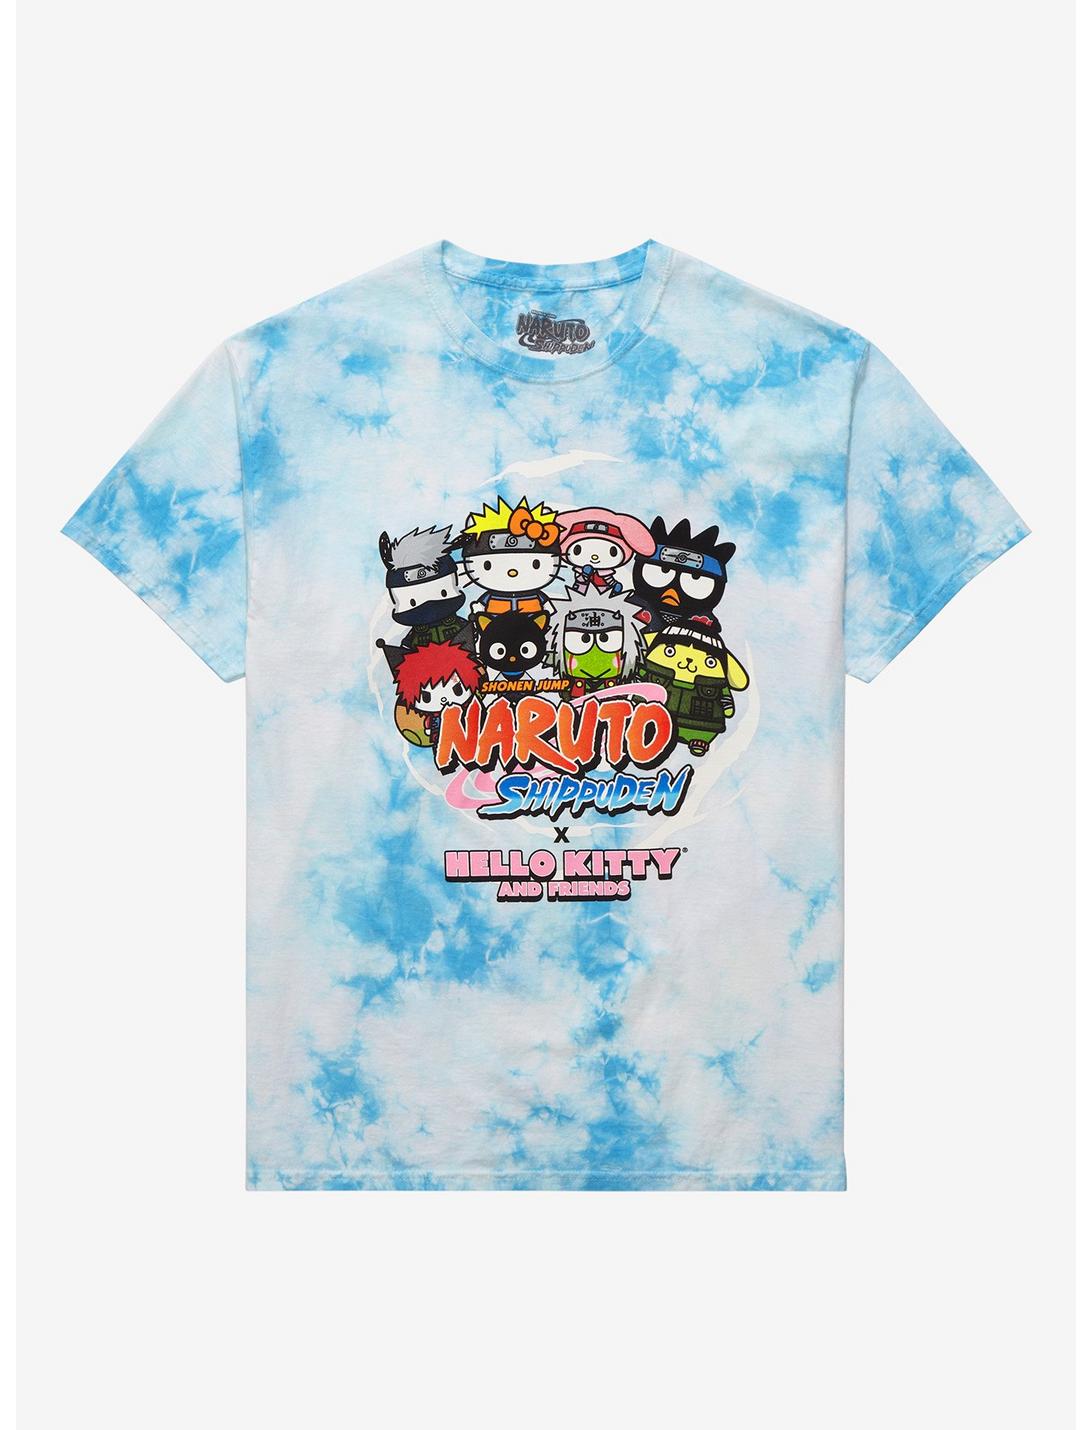 Naruto Shippuden X Hello Kitty And Friends Group Tie-Dye T-Shirt, BLUE, hi-res